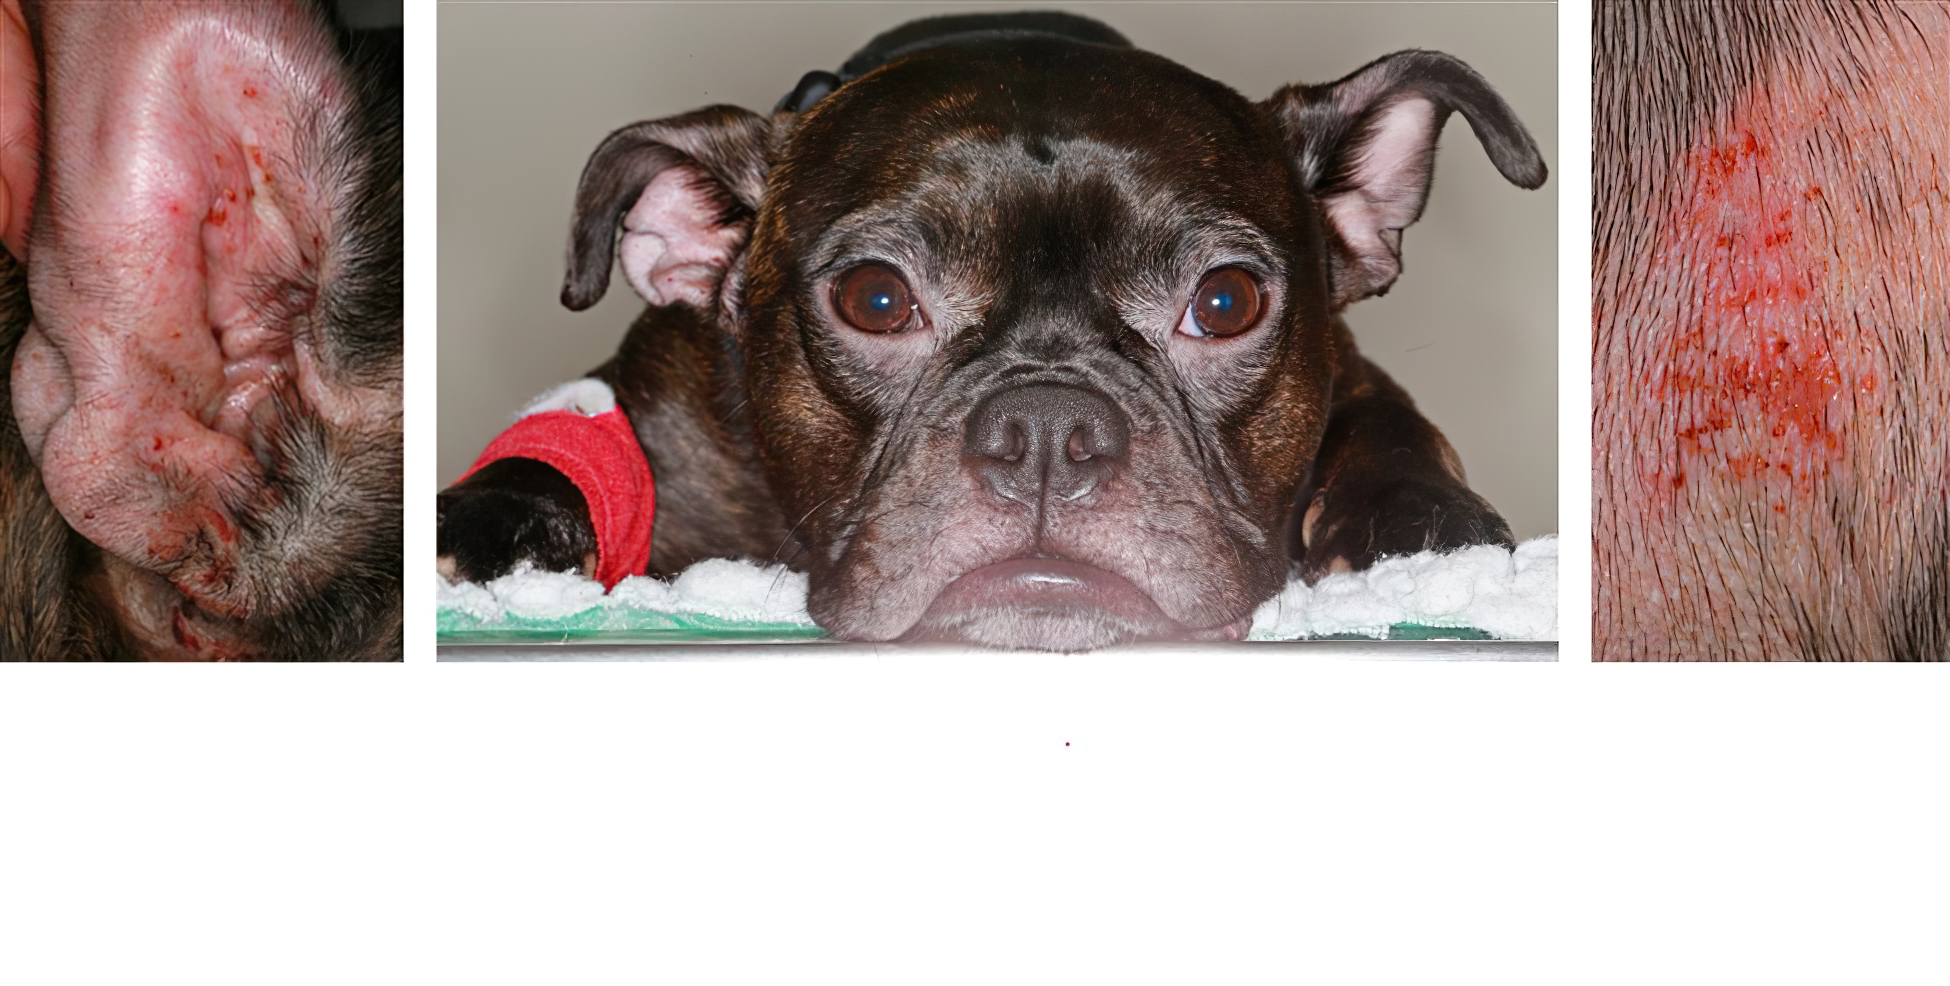 Canine Atopic Dermatitis: redness, self-traumatic hair loss & excoriations on the Face, Ears & Armpits, young Crossbreed